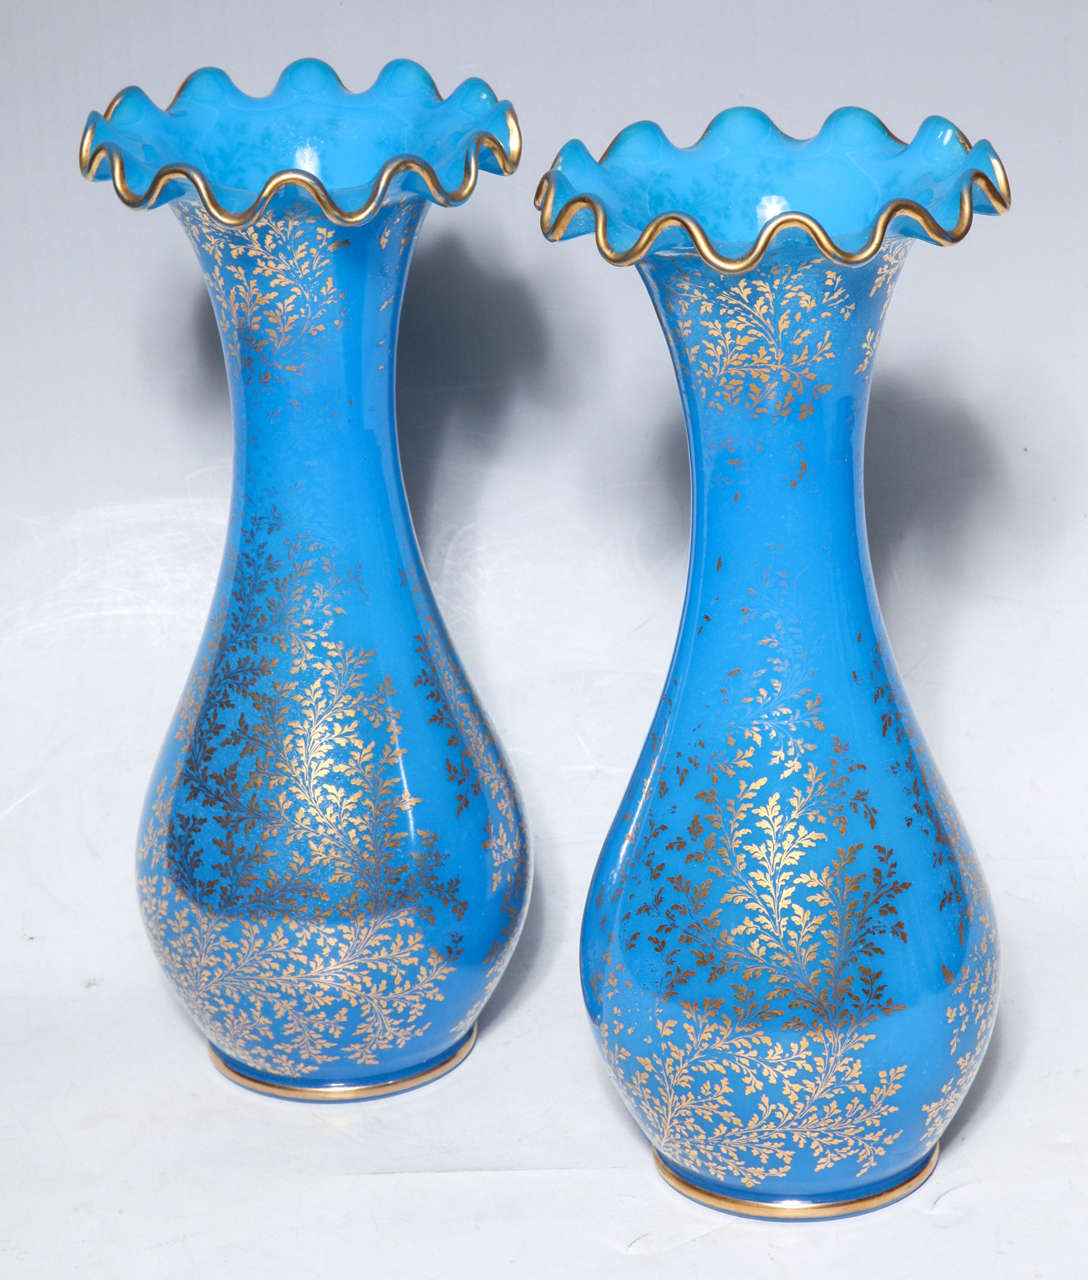 19th Century Pair of Baccarat Blue Opaline Crystal Vases with 24-Karat Gold Decorations For Sale